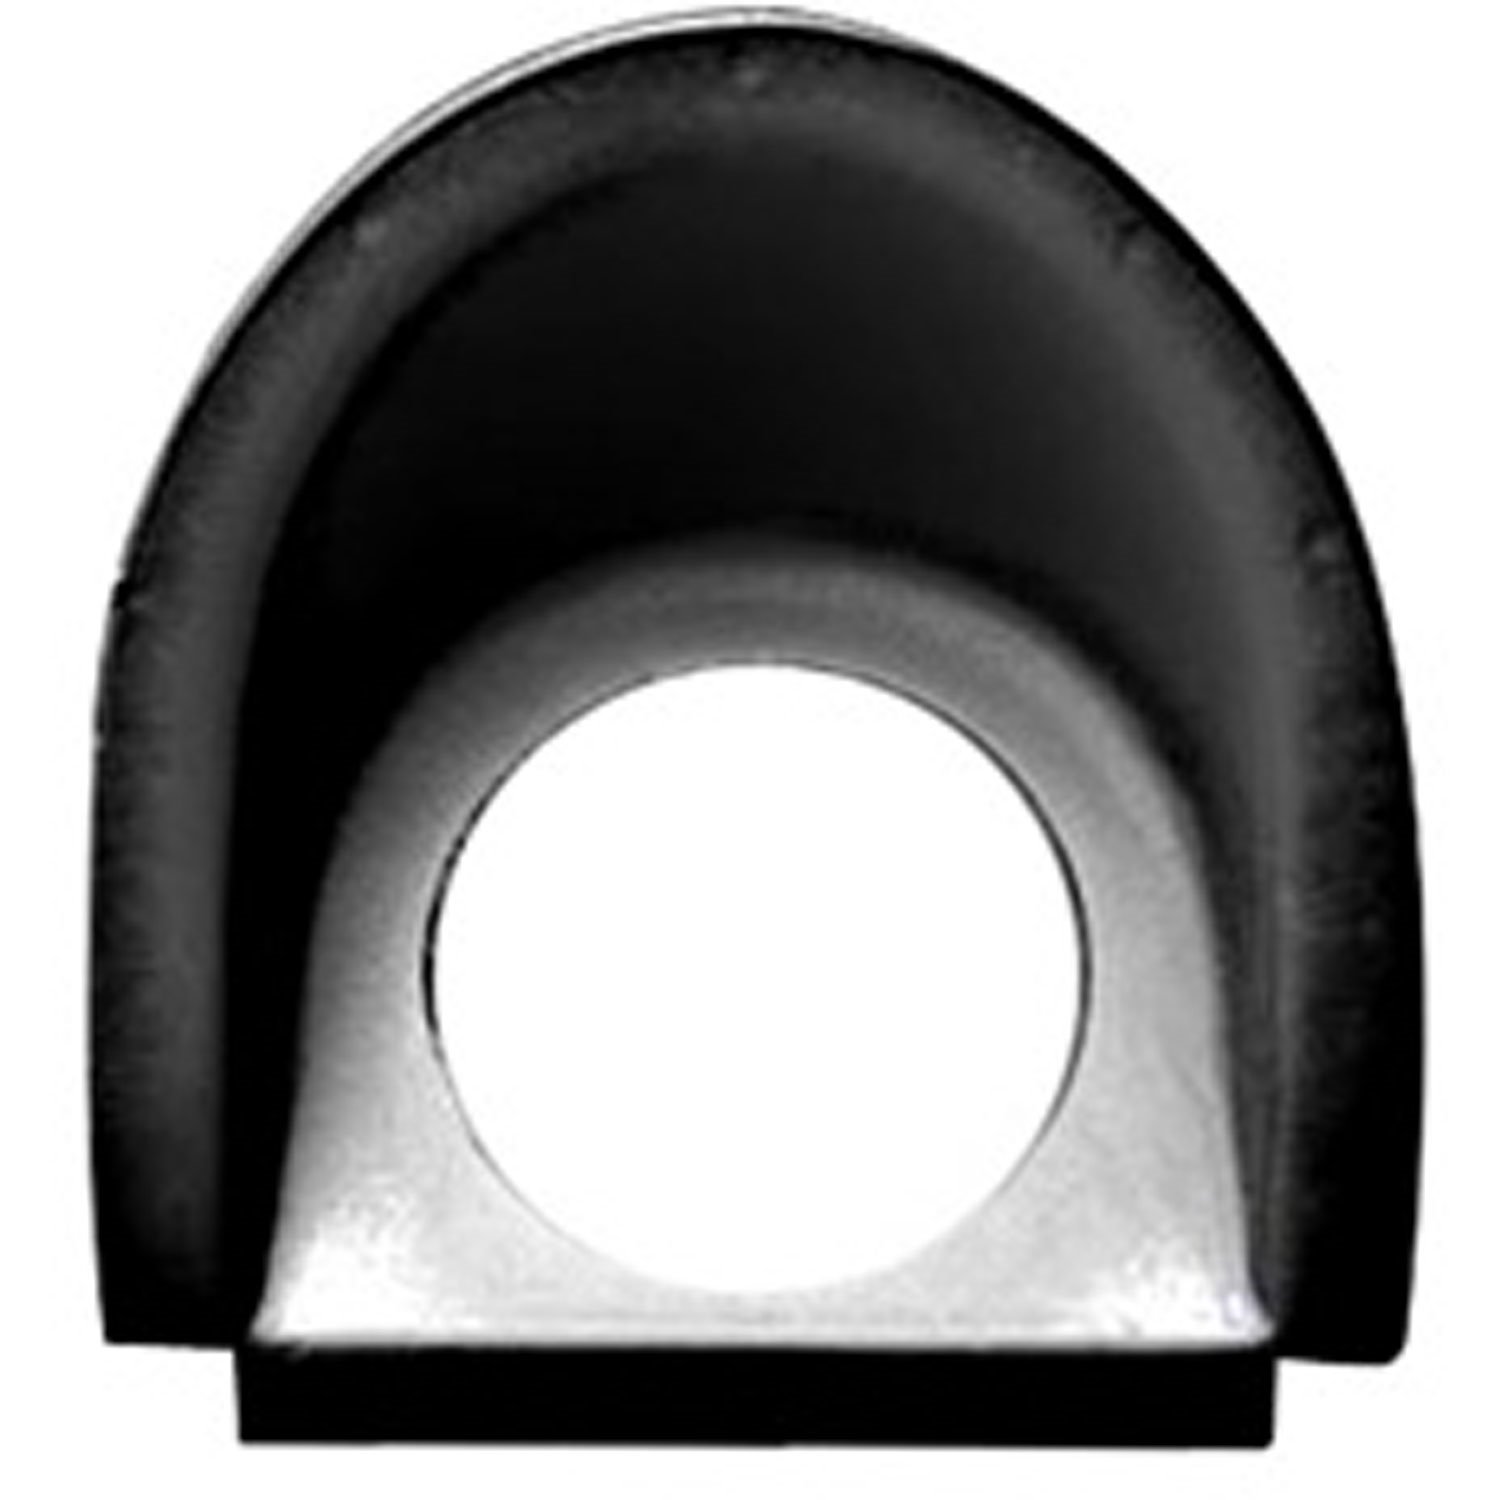 Replacement fuel filler neck housing from Omix-ADA, Fits 46-71 Willys and Jeep models